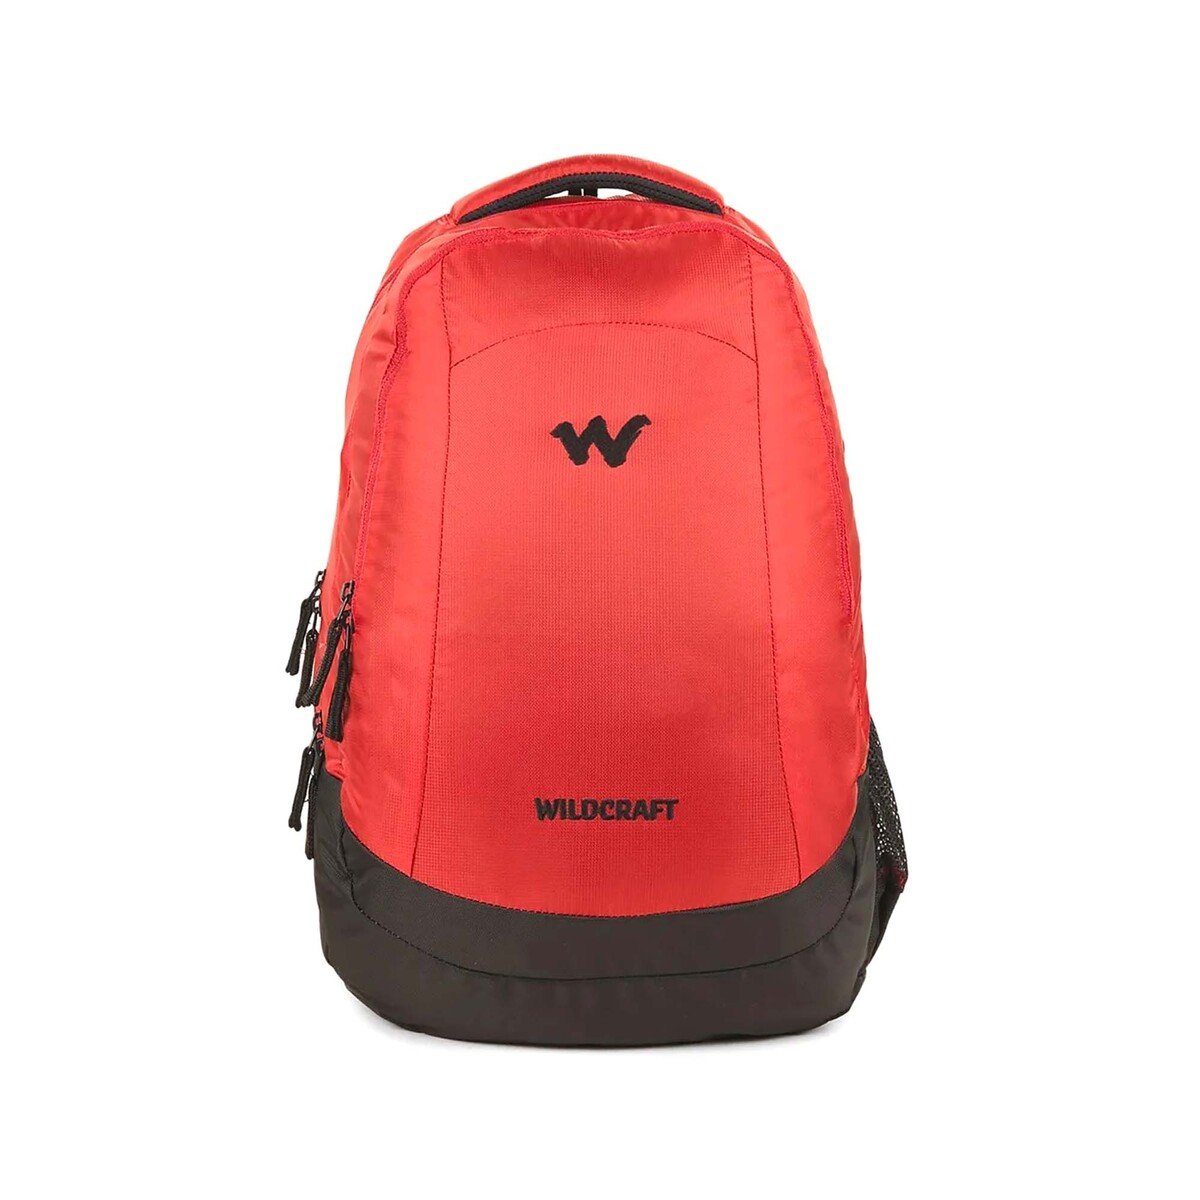 Wildcraft Peza Laptop Backpack 20inch Red